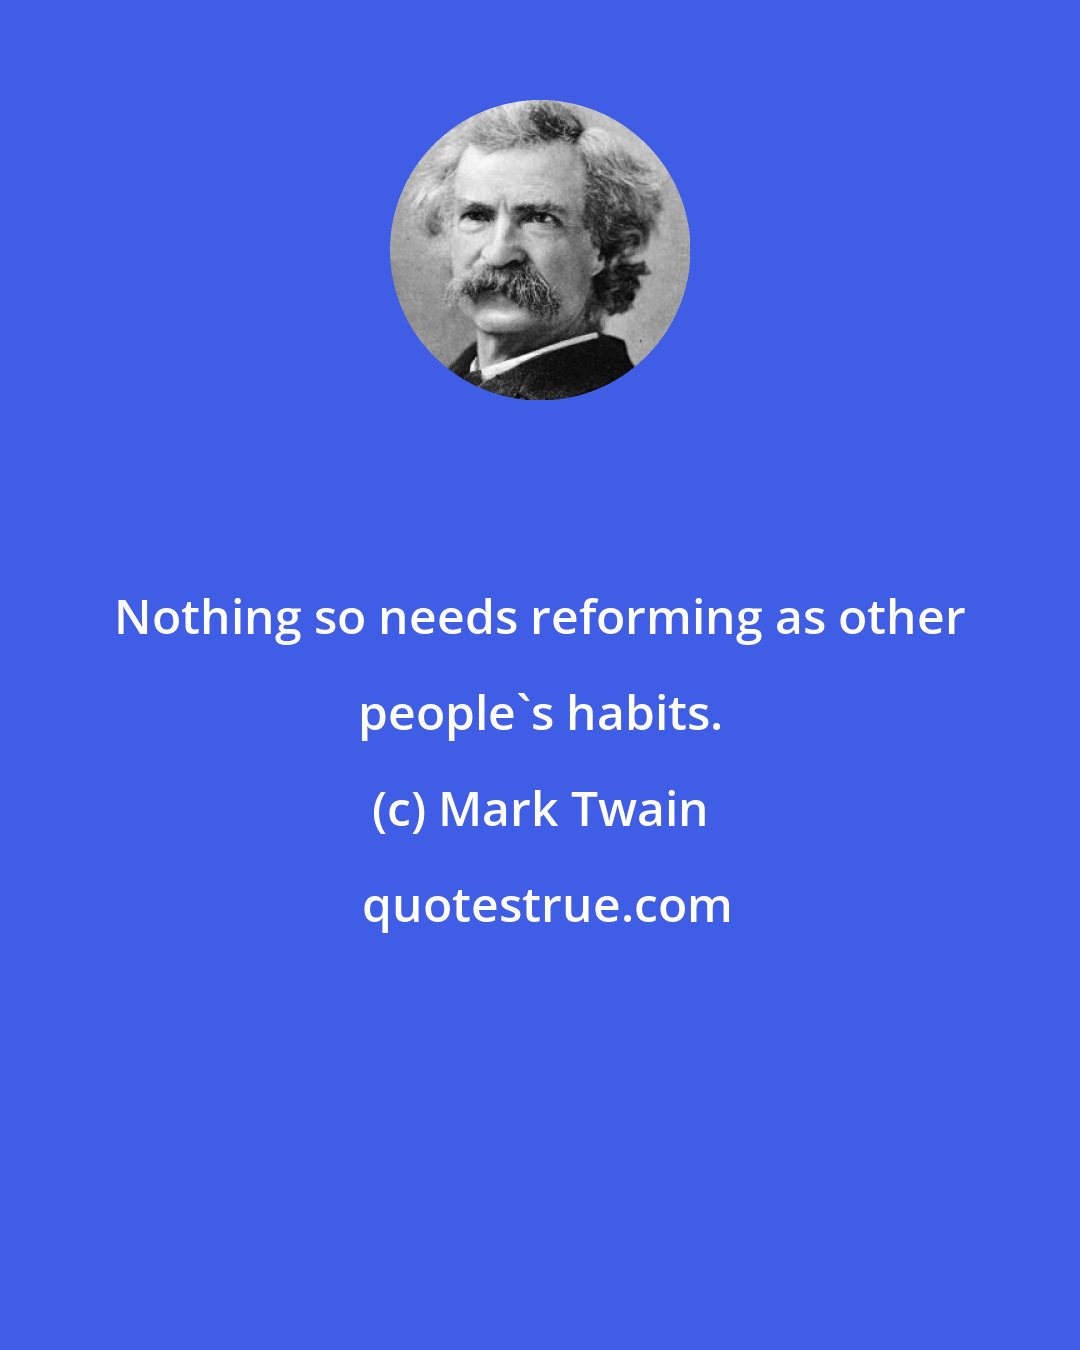 Mark Twain: Nothing so needs reforming as other people's habits.